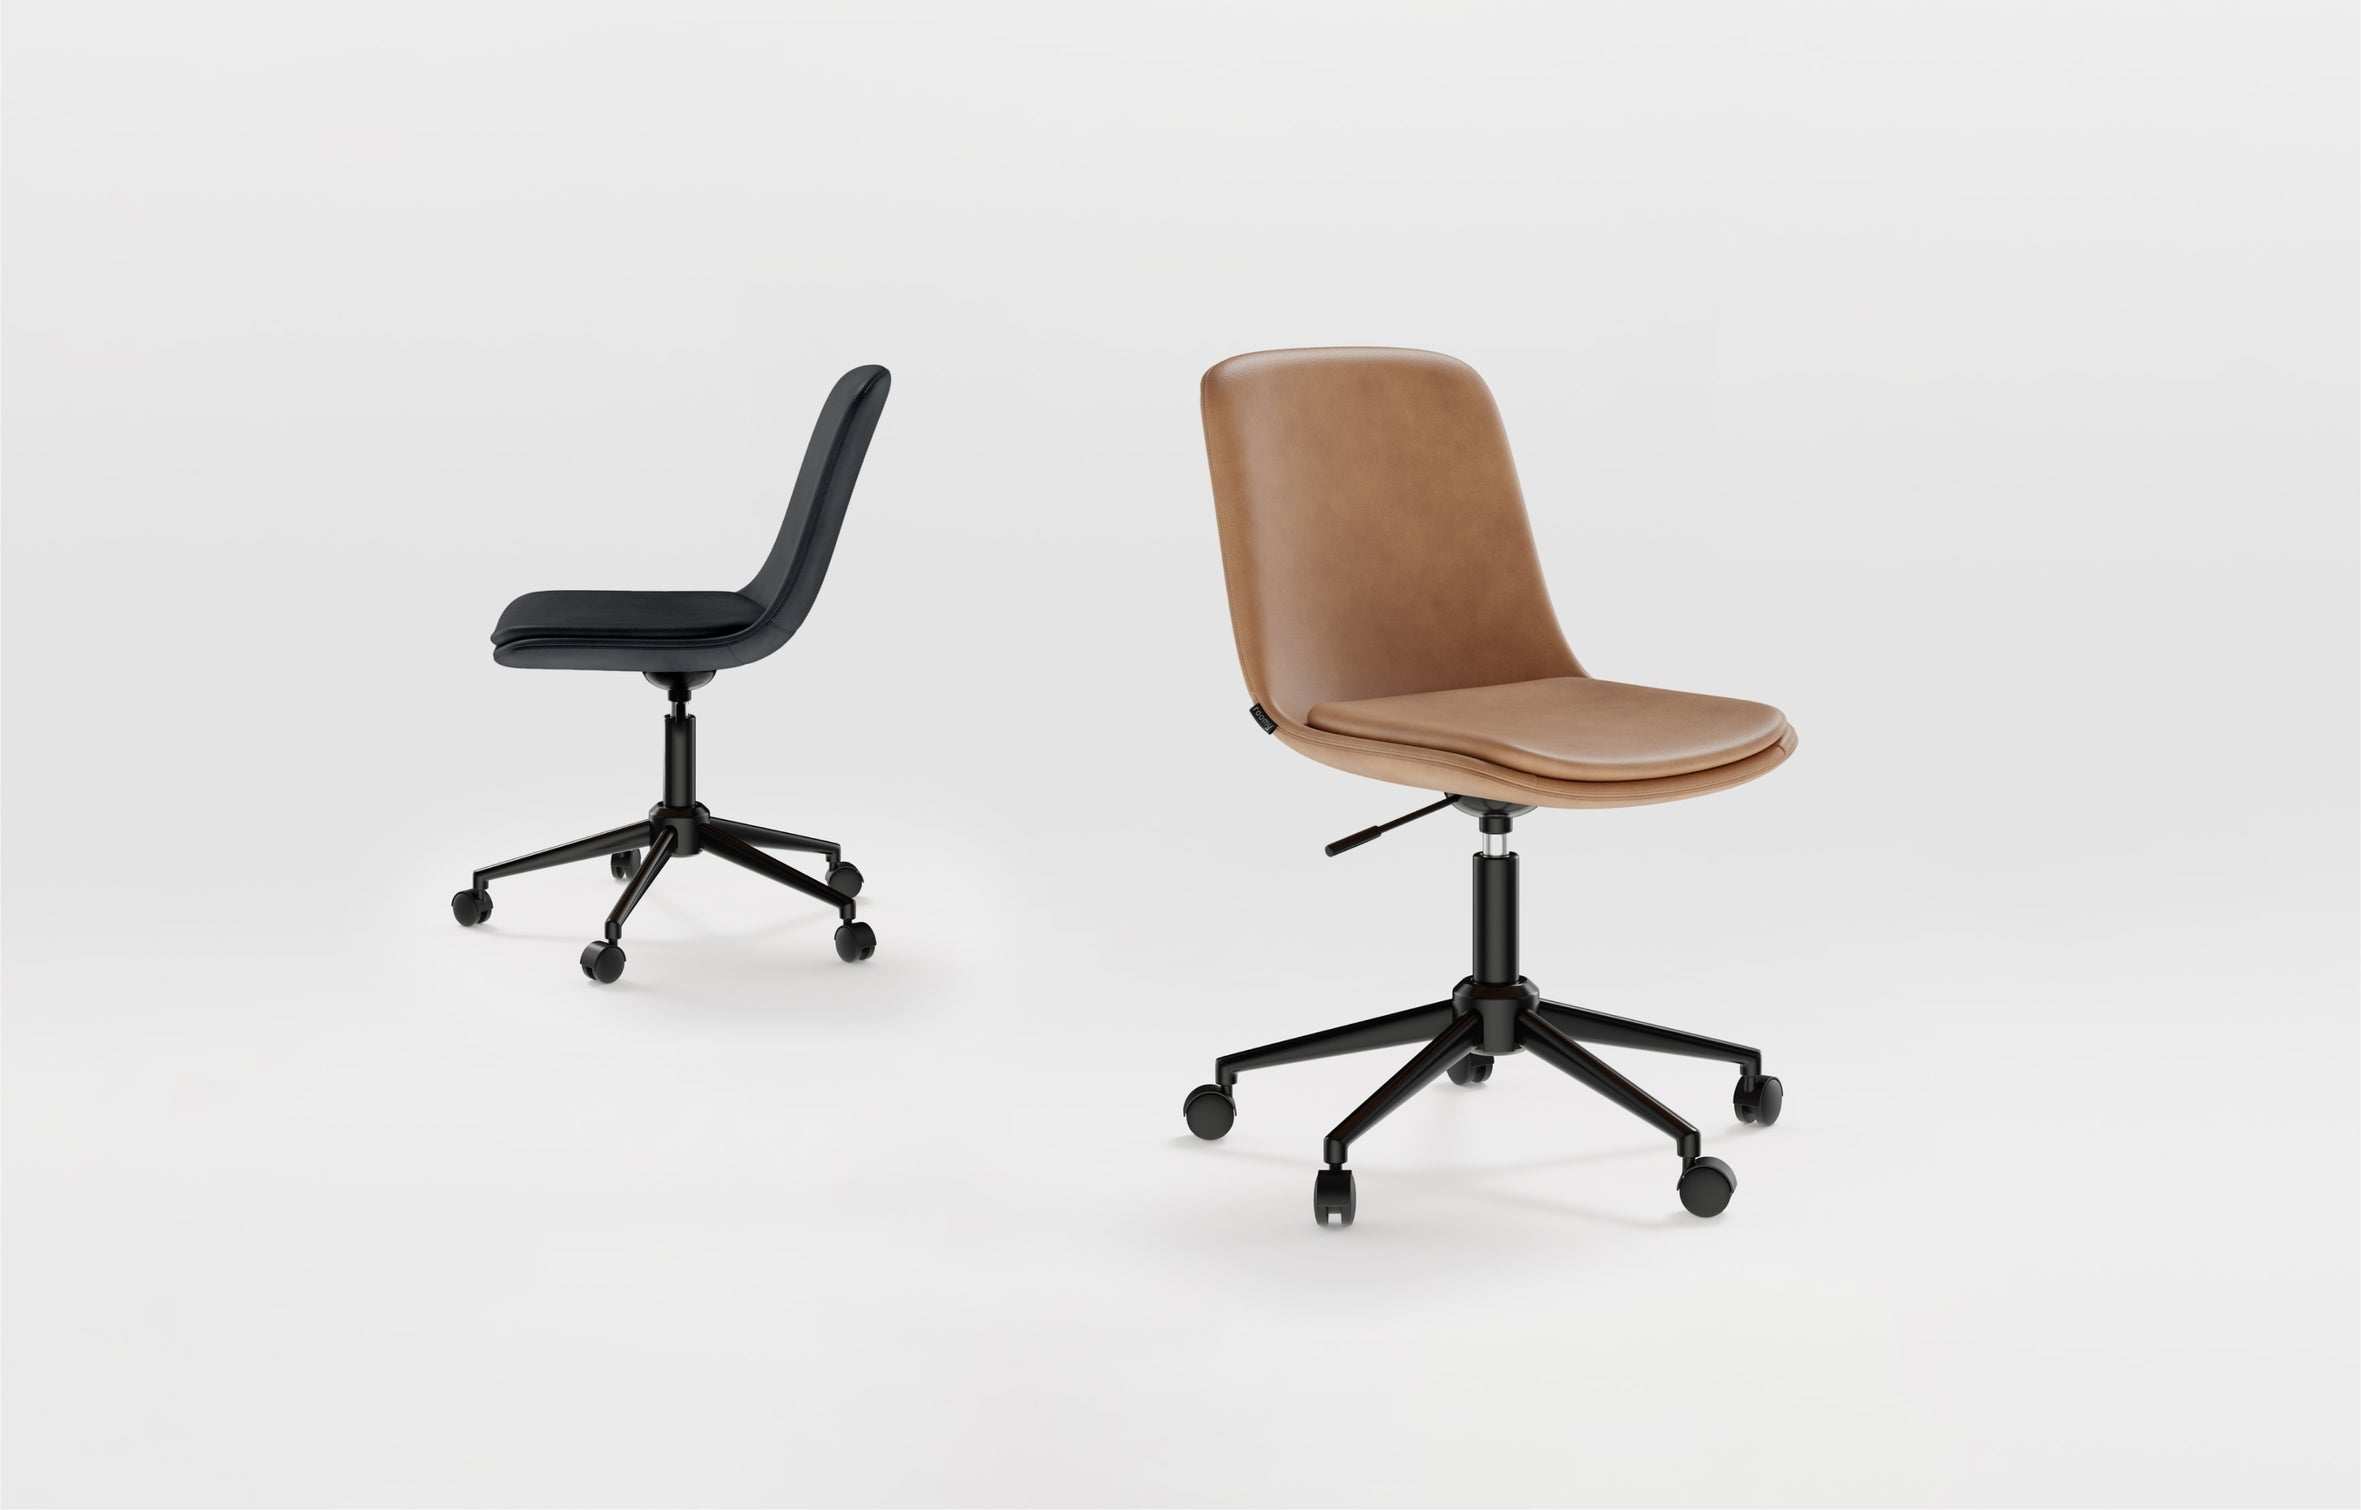 Layer desk chair | ff&e dorm furniture manufacturers | Roomy | Chicago